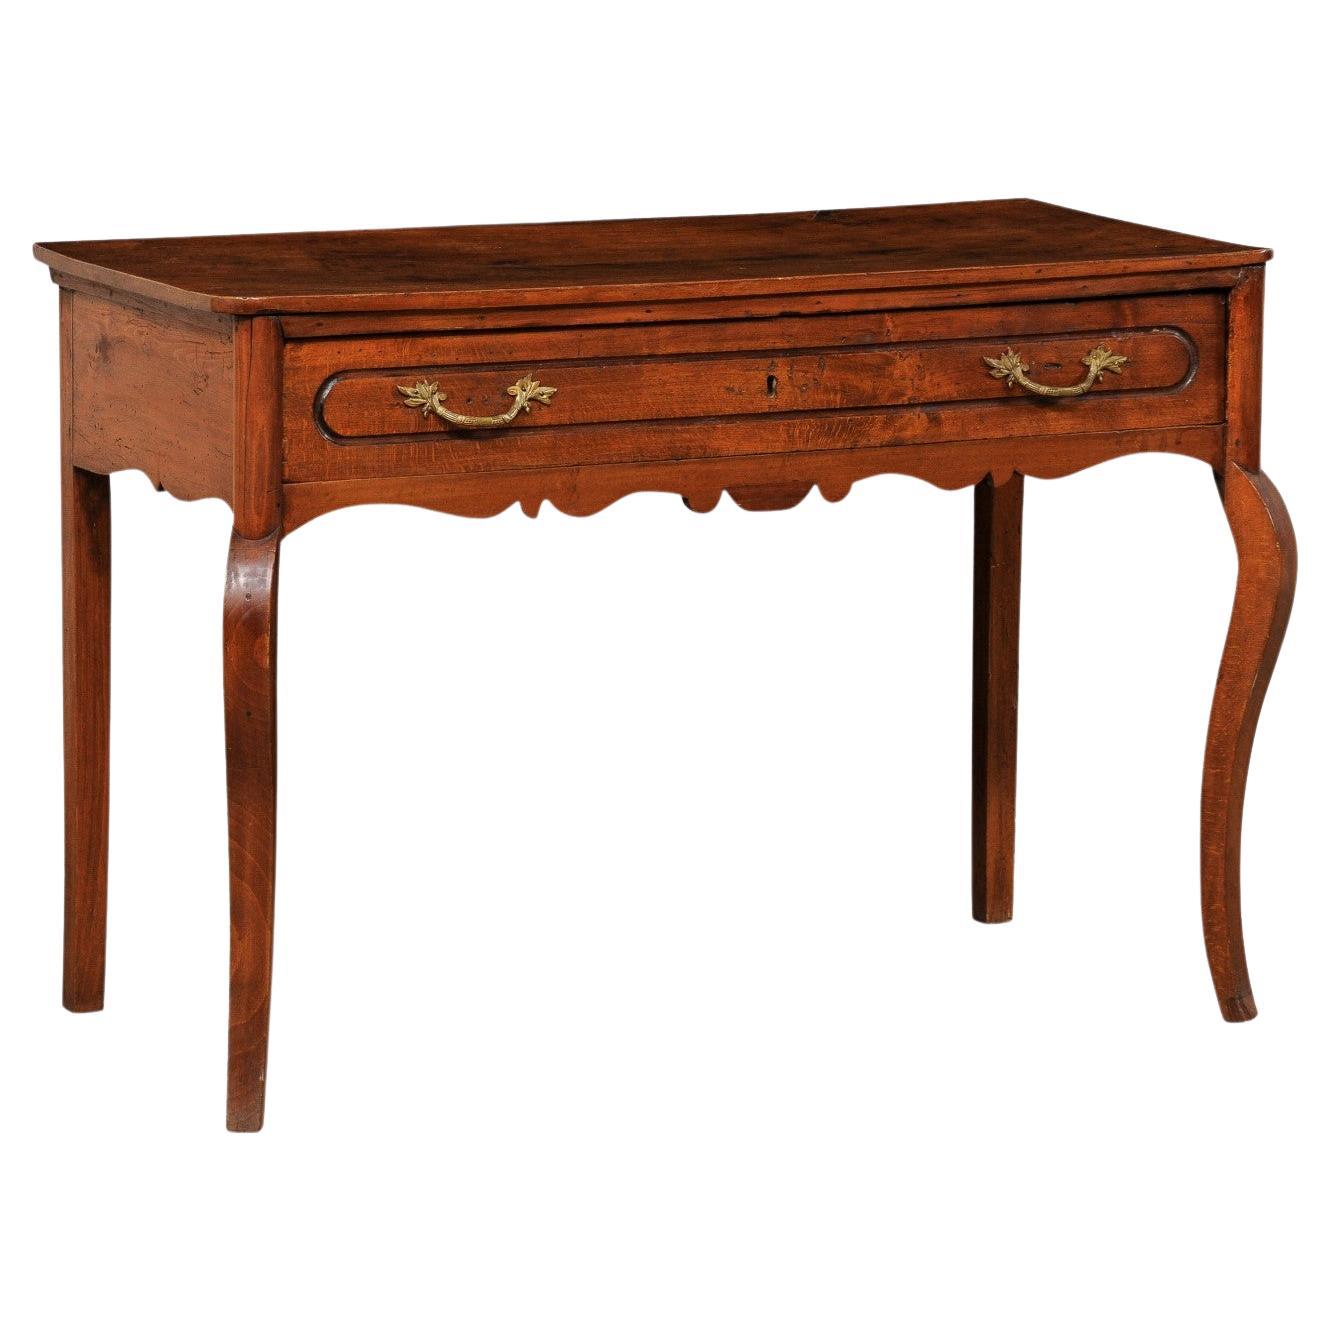 18th C. Italian Walnut Console Table with Full Size Drawer 'or a Small Server' For Sale